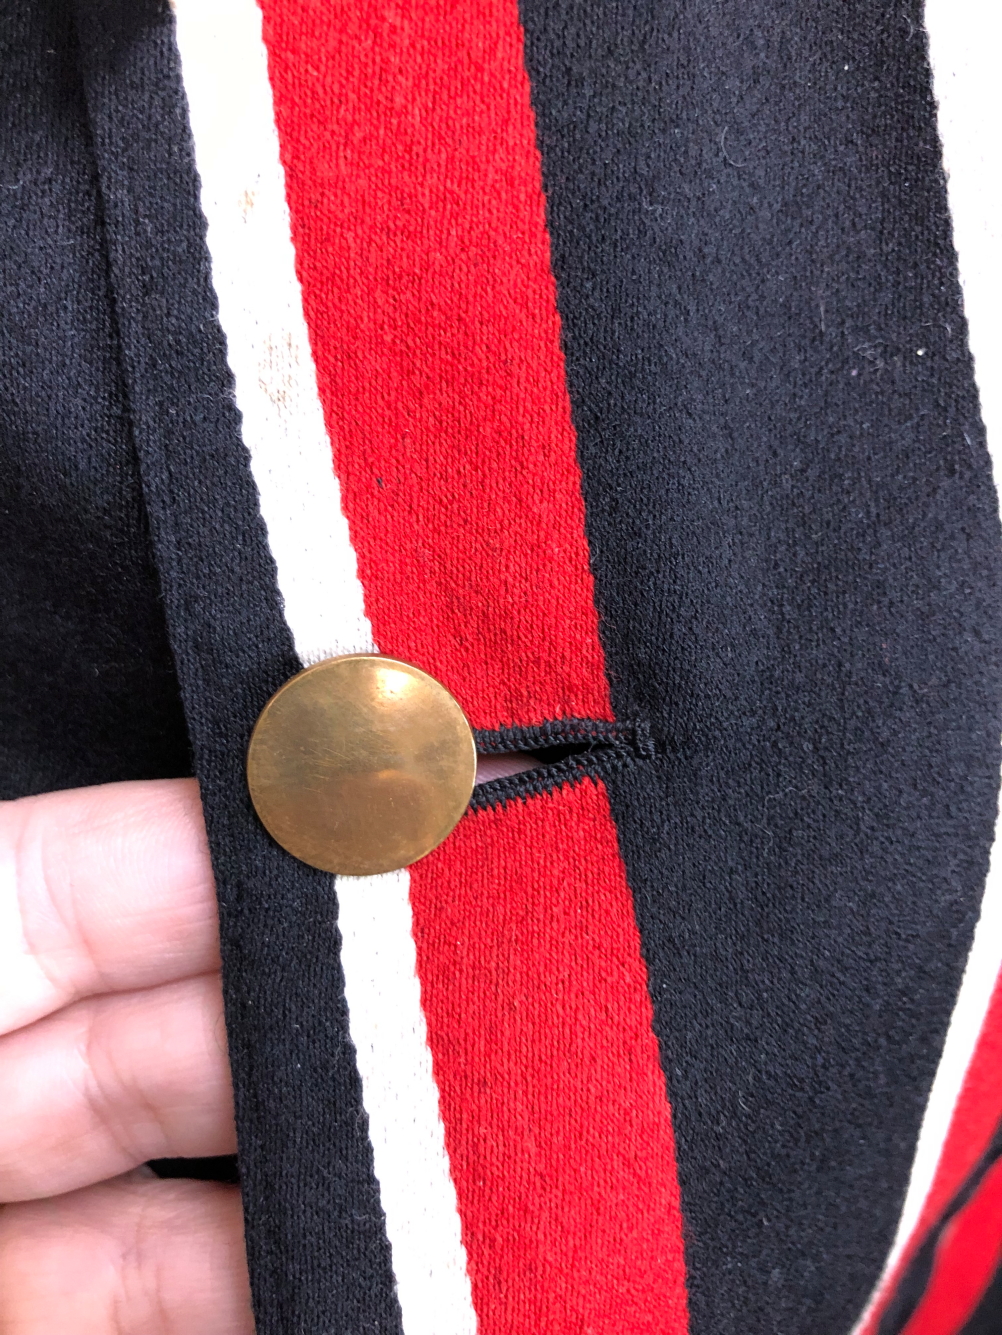 BLAZER. A MANS RED, BLACK AND WHITE BOATING BLAZER WITH ARMORIAL ON THE POCKET. PIT TO PIT 46cms, - Image 4 of 10